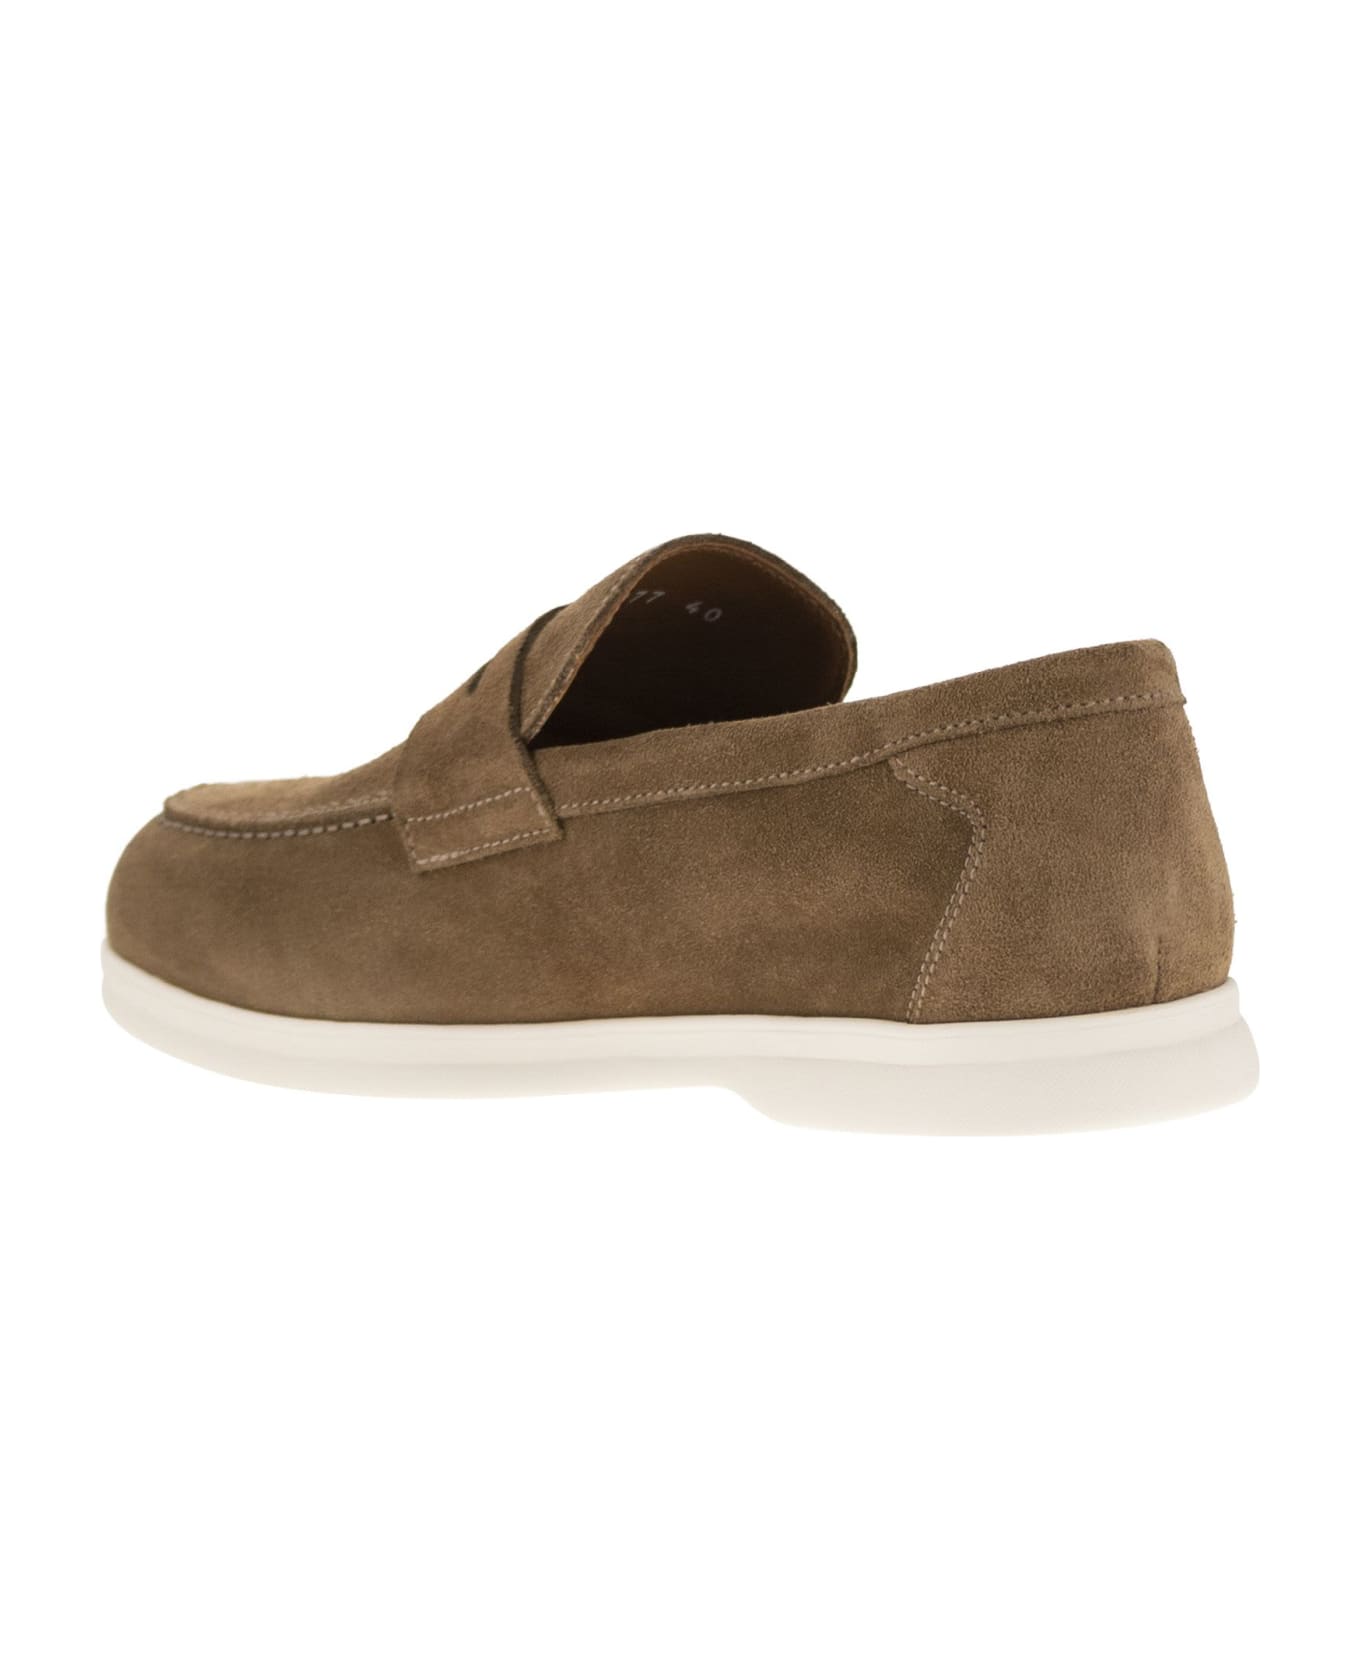 Doucal's Penny - Suede Moccasin - Beige